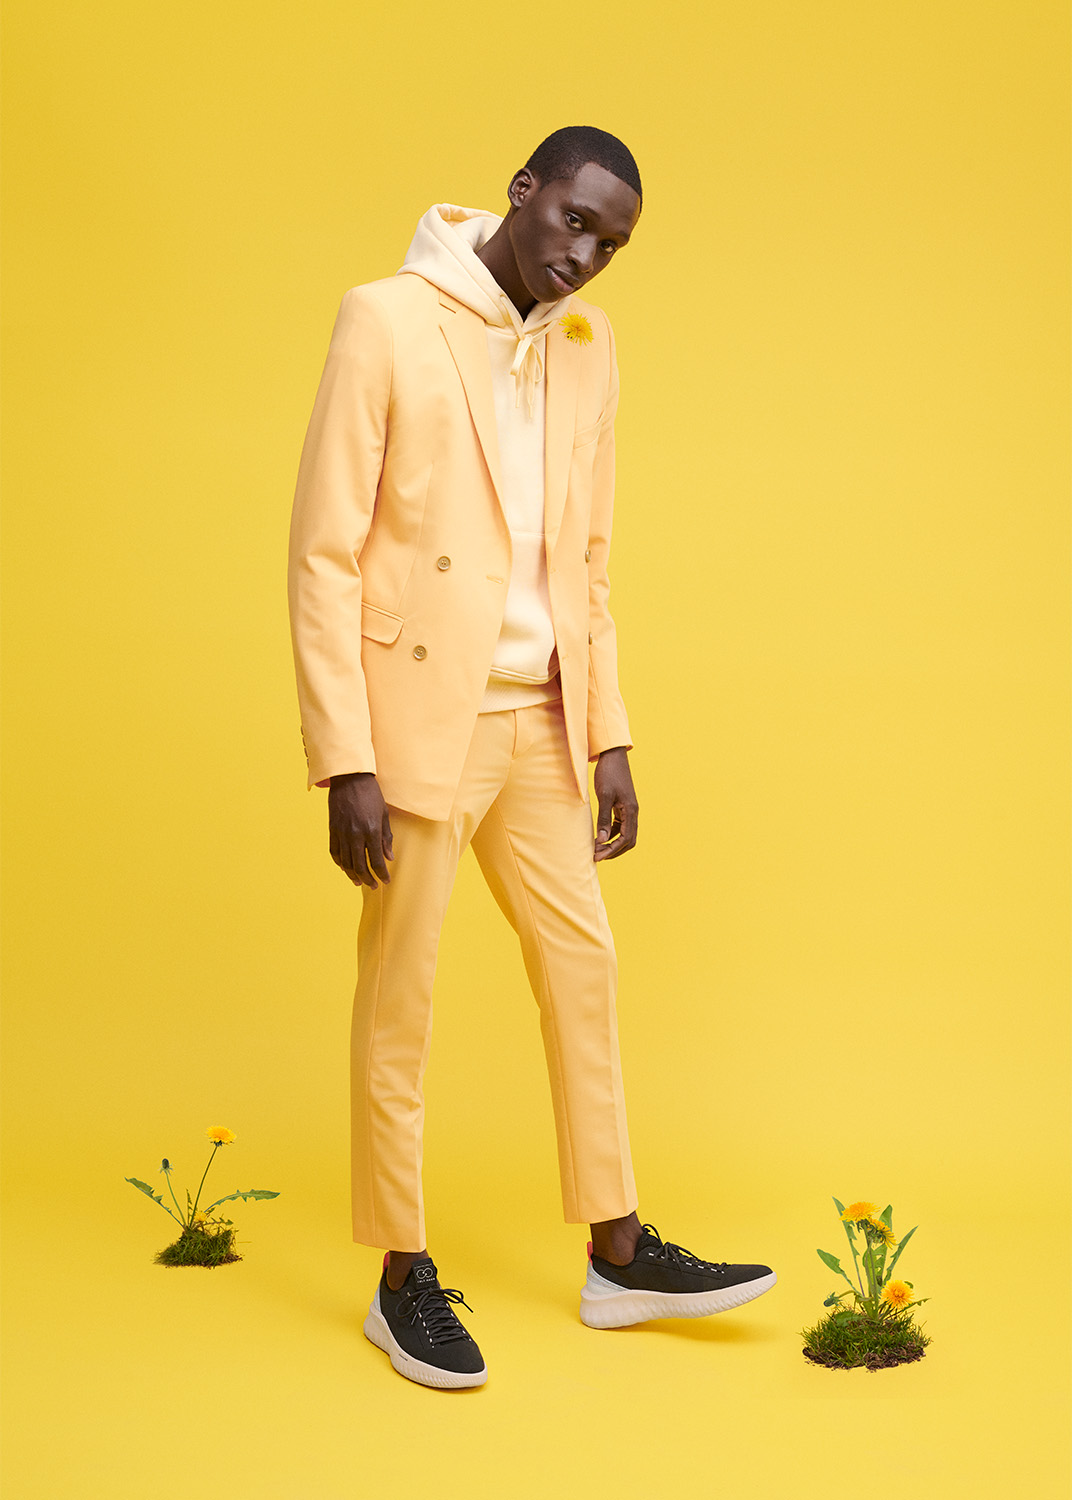 spring campaign for Cole Haan, shot in New York City by Alex John Beck